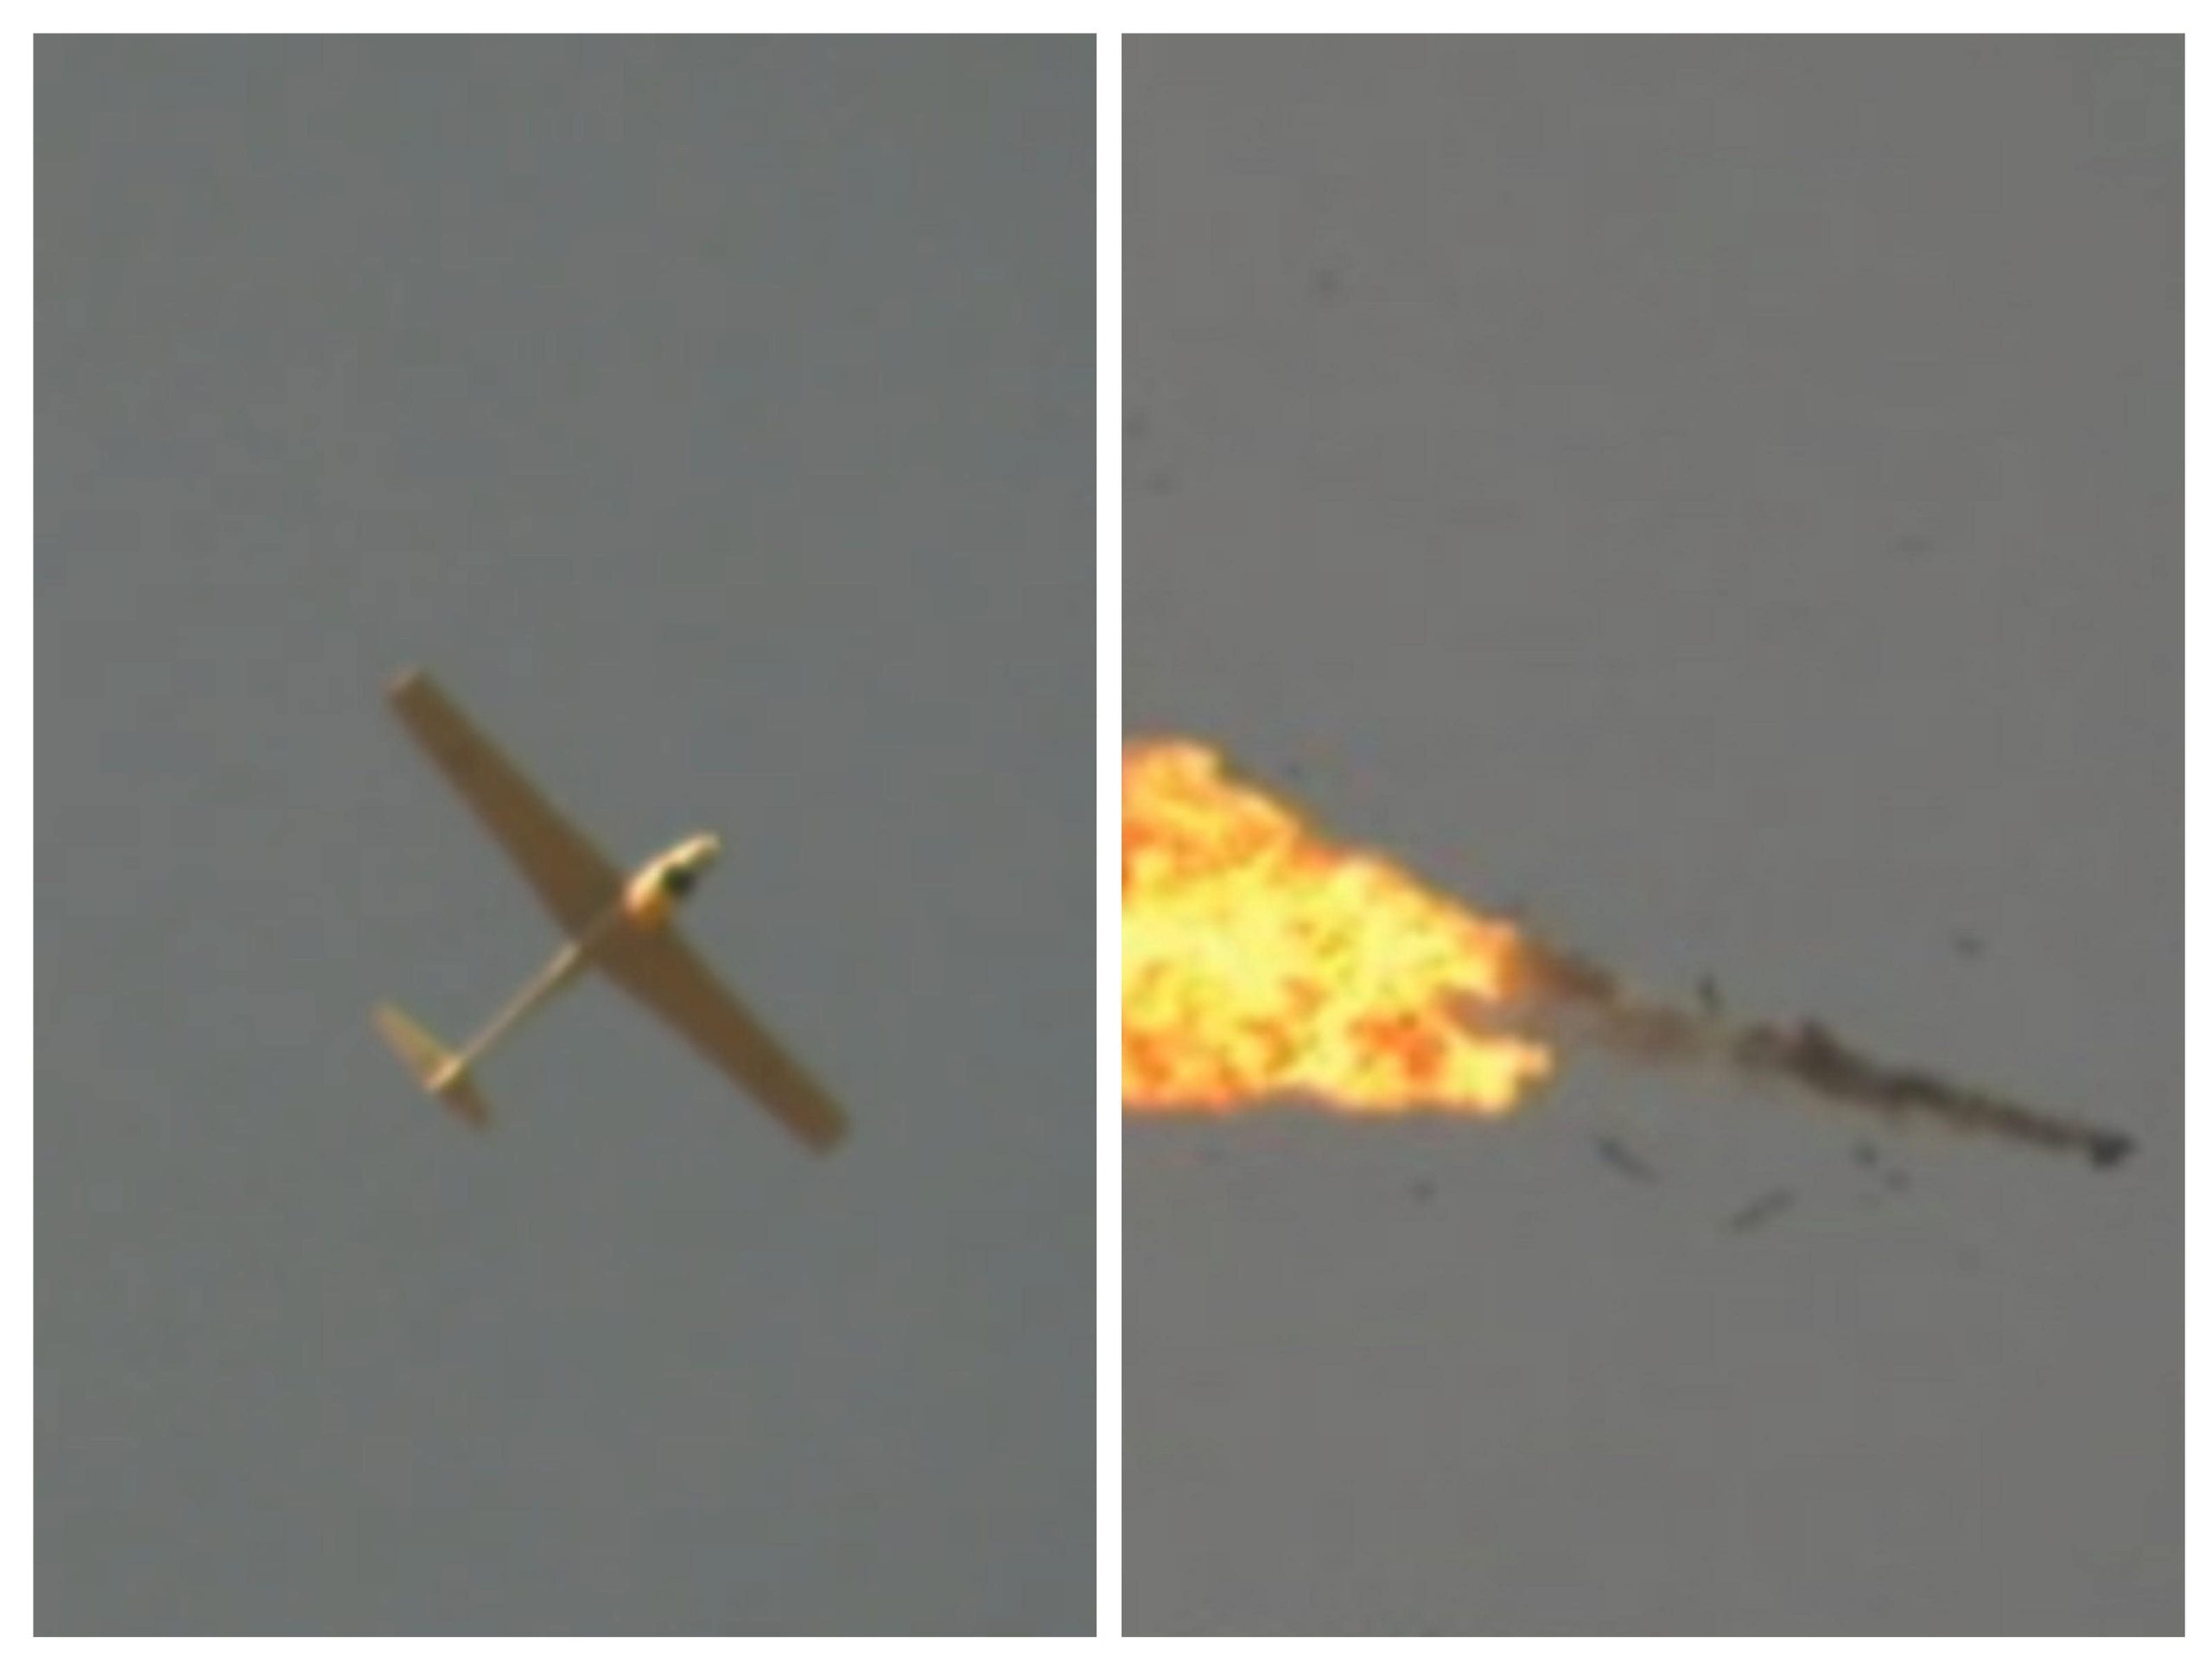 UPDATED: Drone shot down by US forces near Tal Baydar: SOHR 99